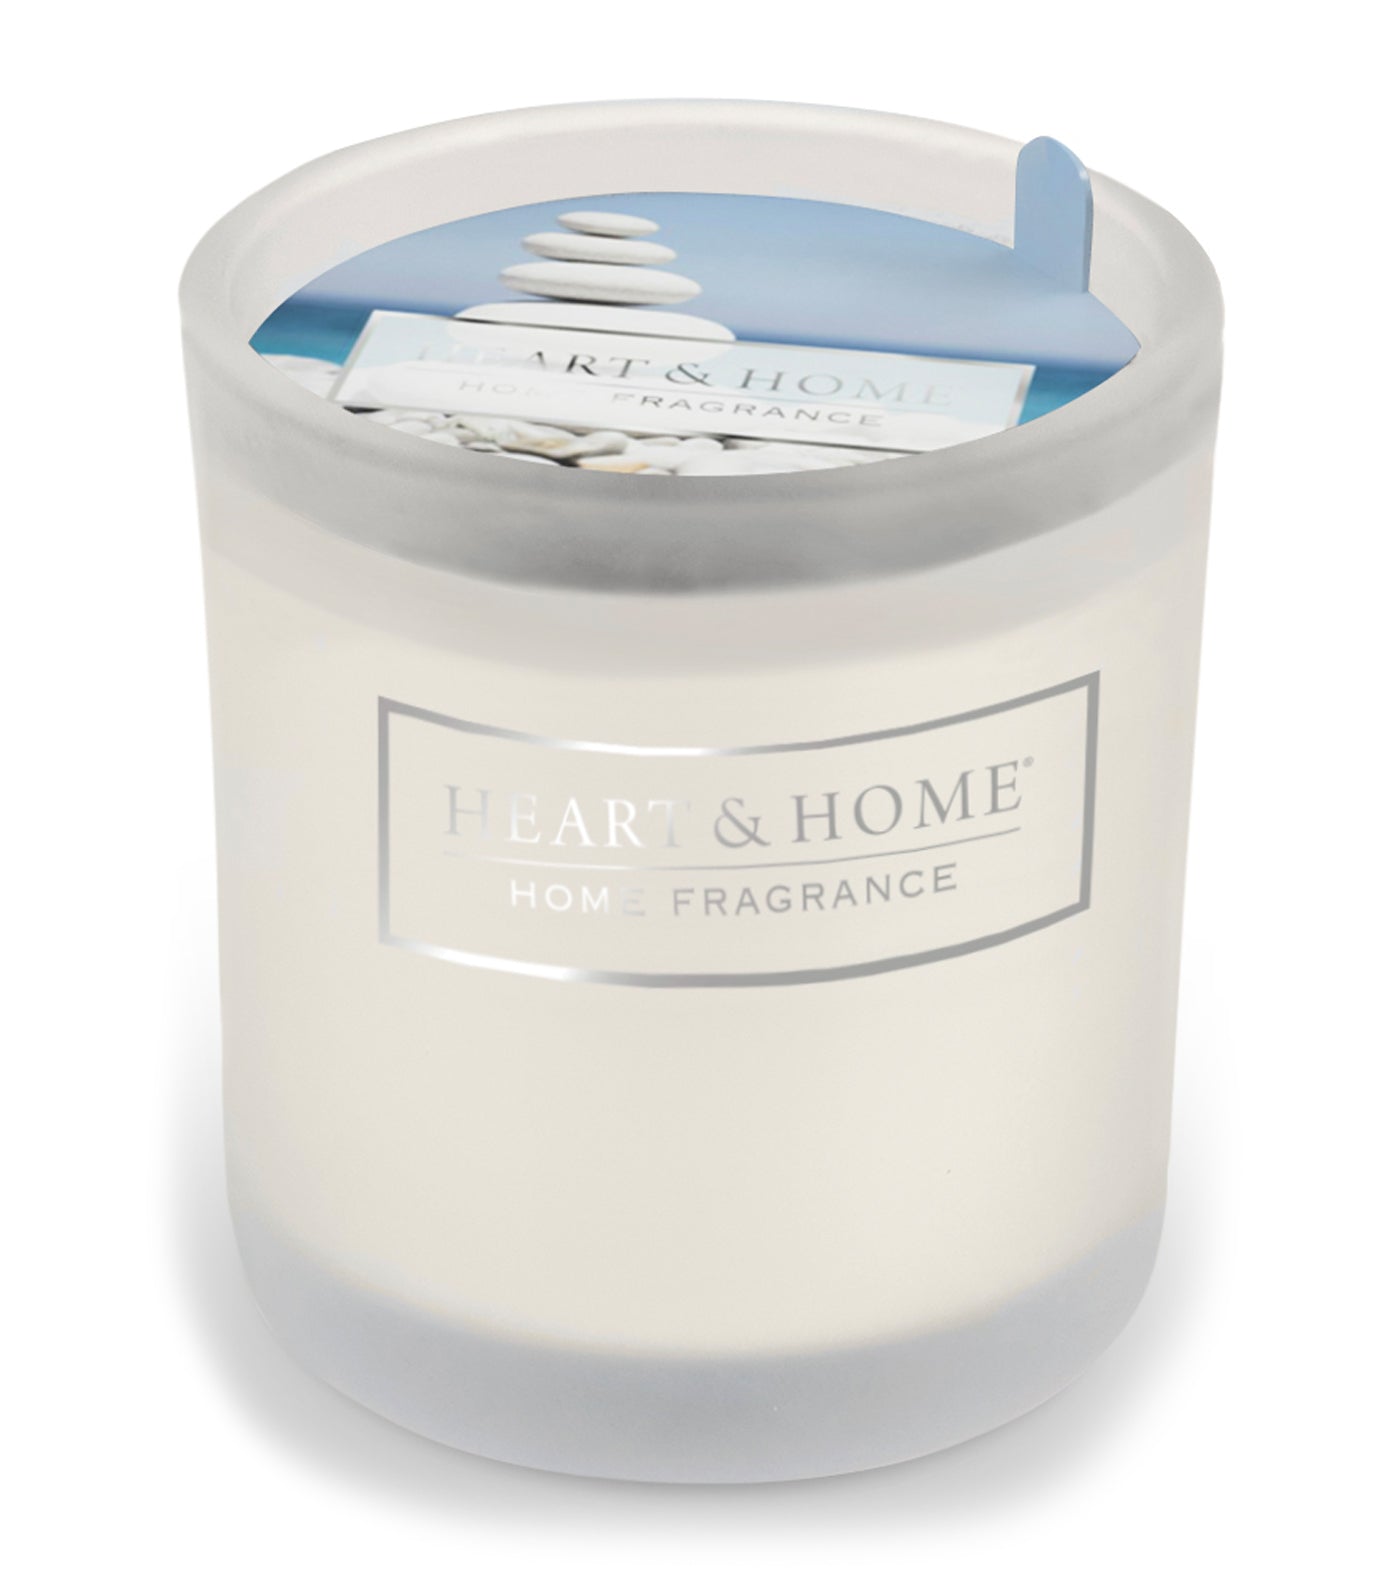 heart & home simply spa - glass votive soy candle